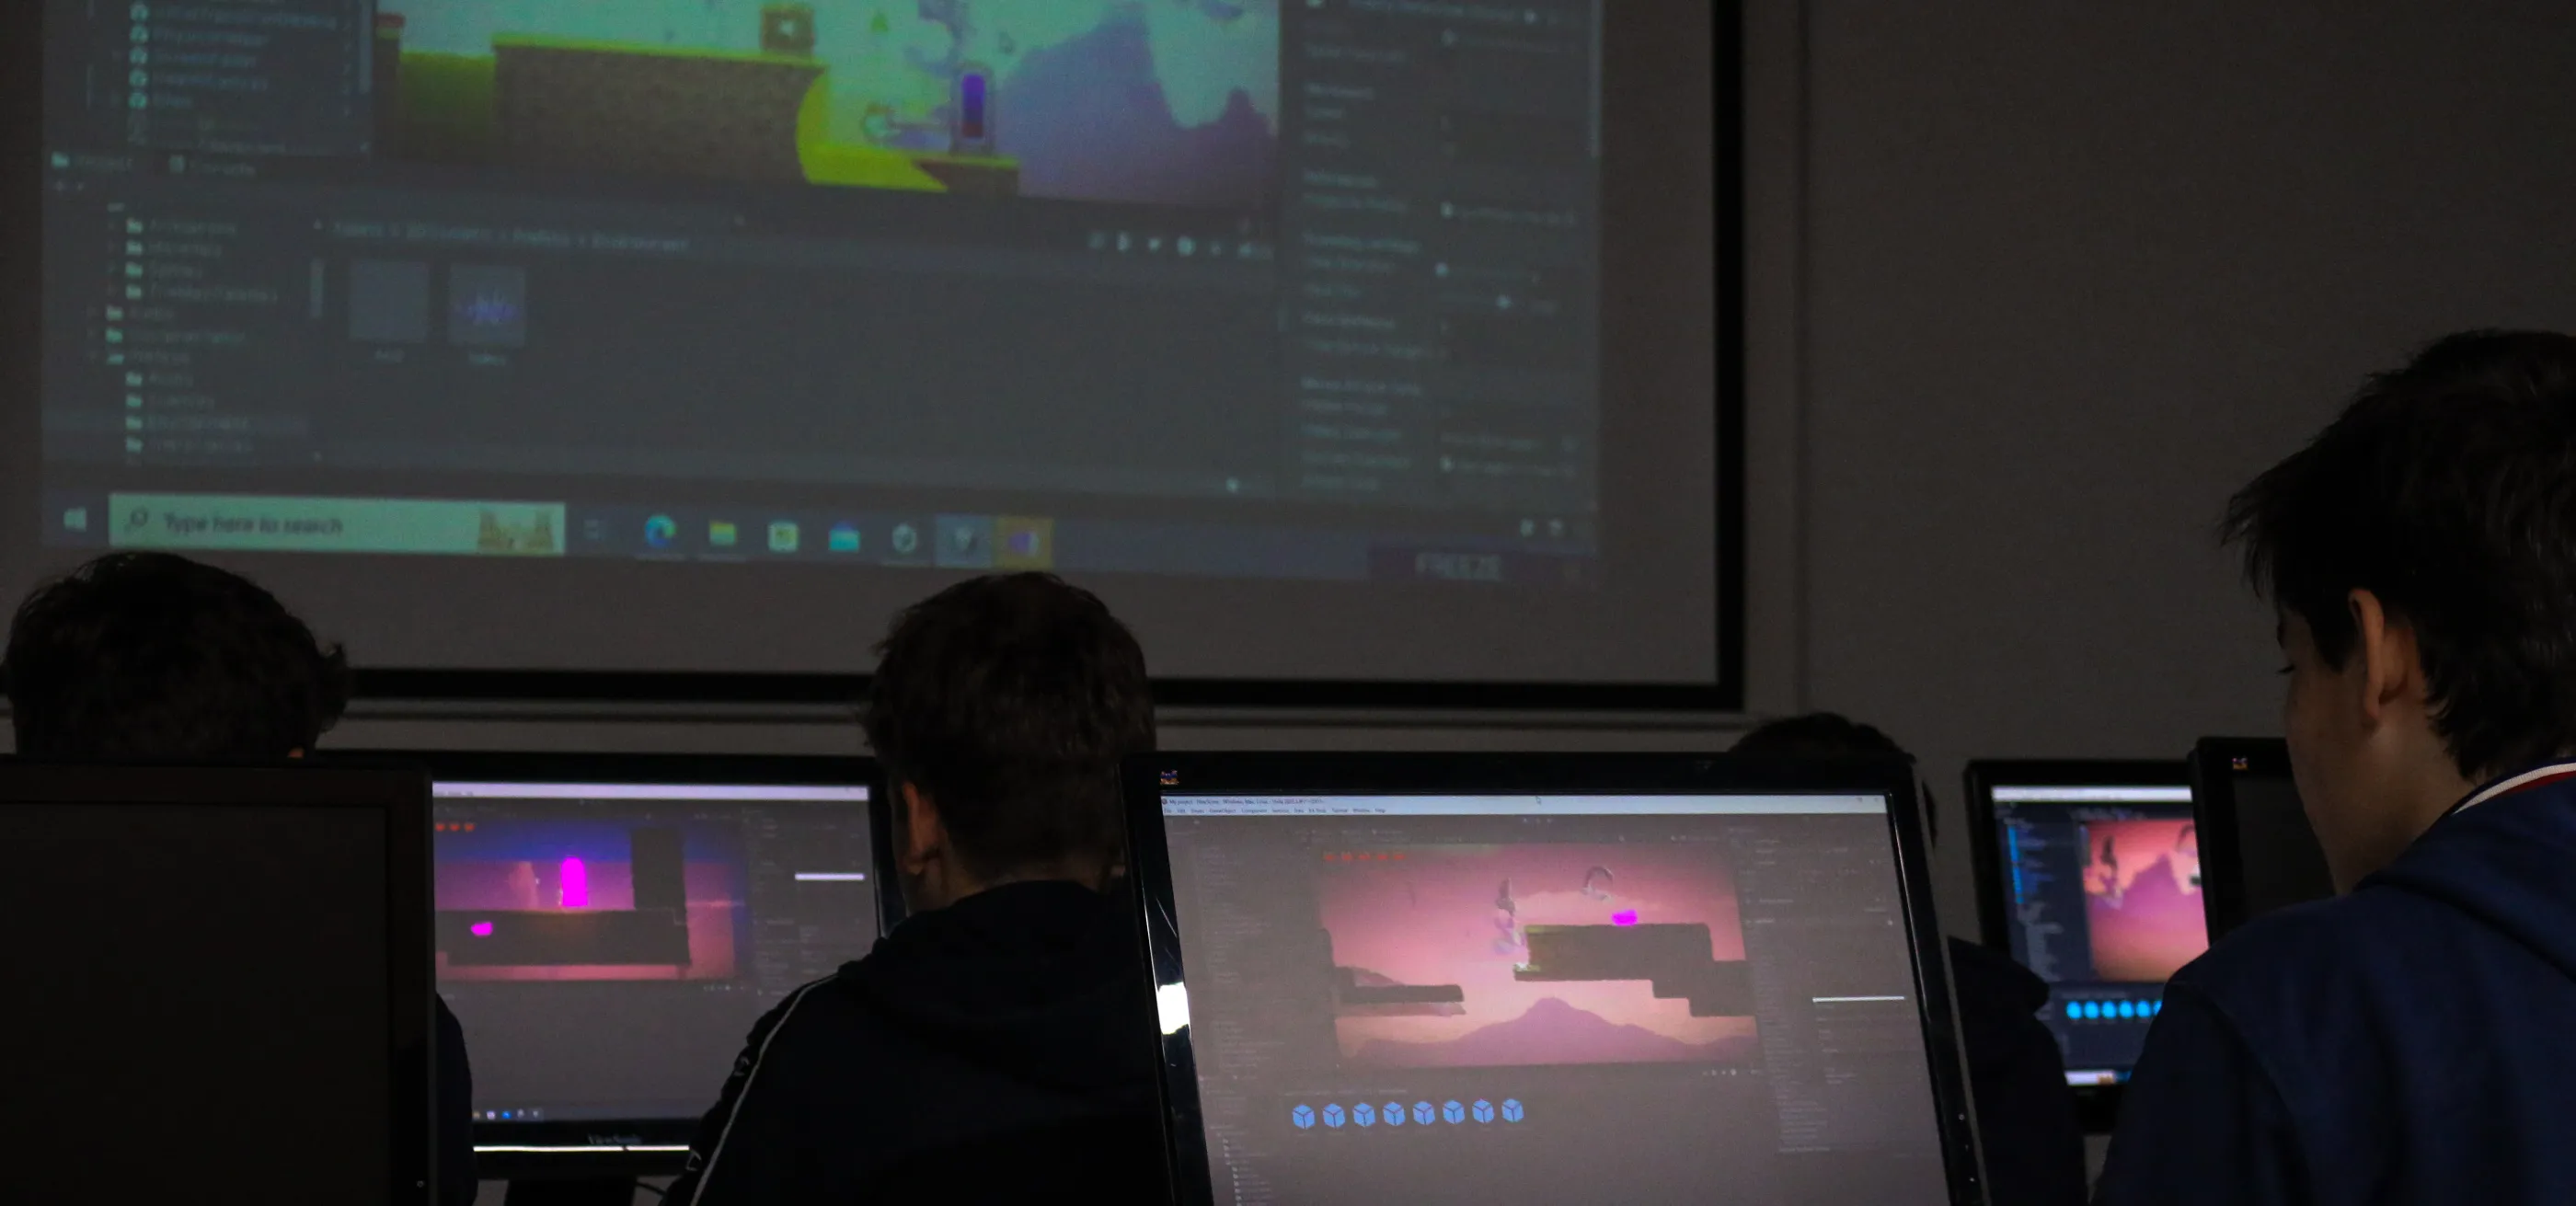 students work on a project using Unity engine while instructor displays something on the big screen in the background